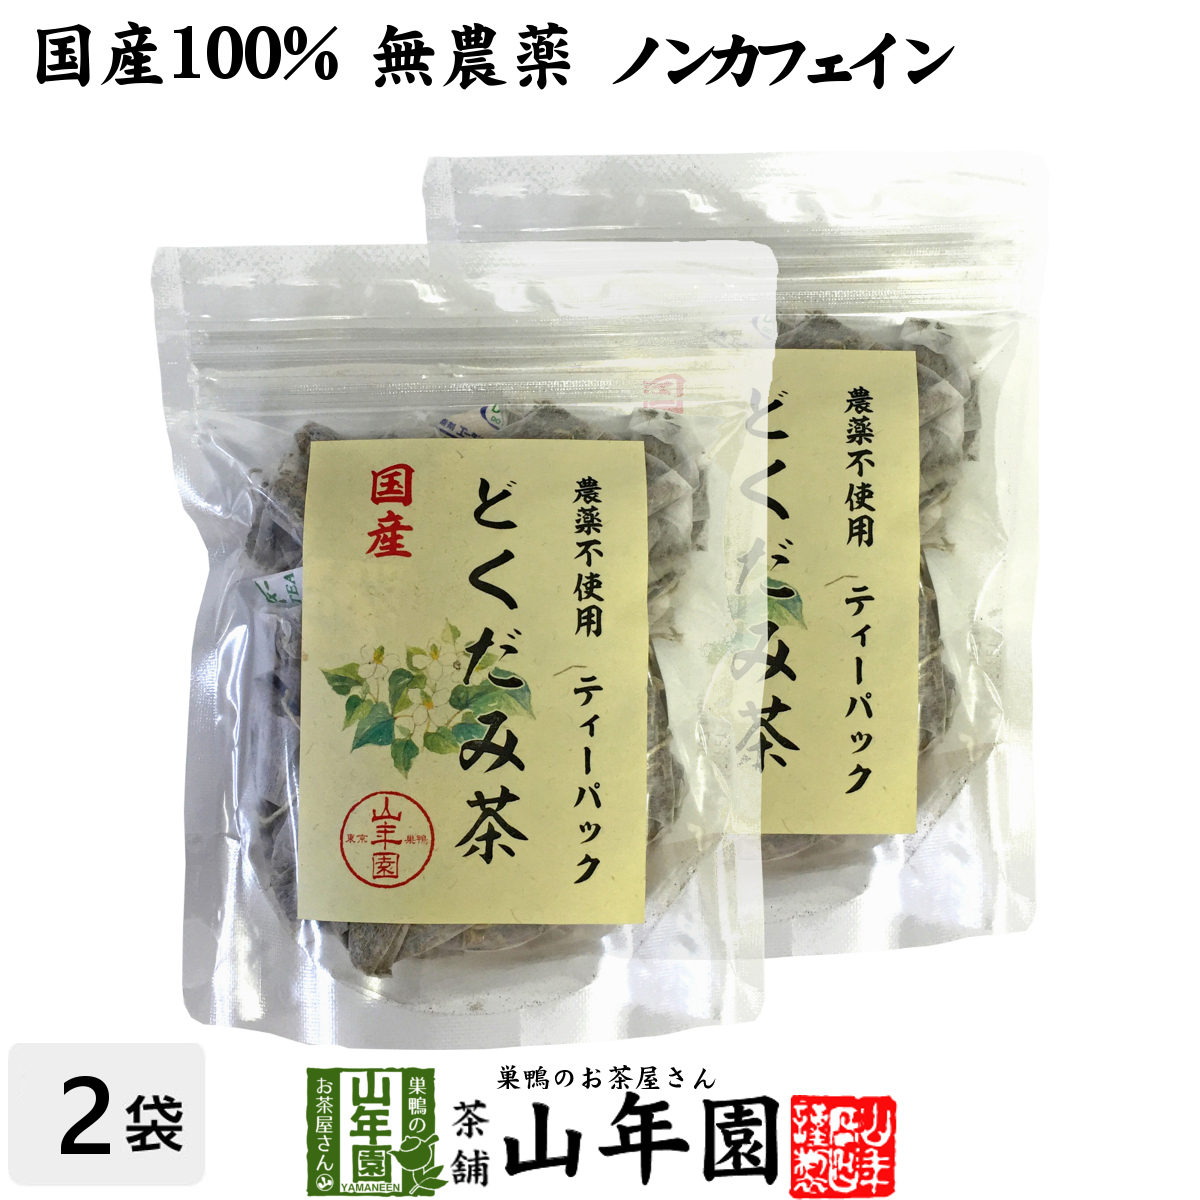  health tea domestic production 100%.... tea tea pack less pesticide 1.5g×20 pack ×2 sack set non Cafe in Miyazaki prefecture production free shipping 